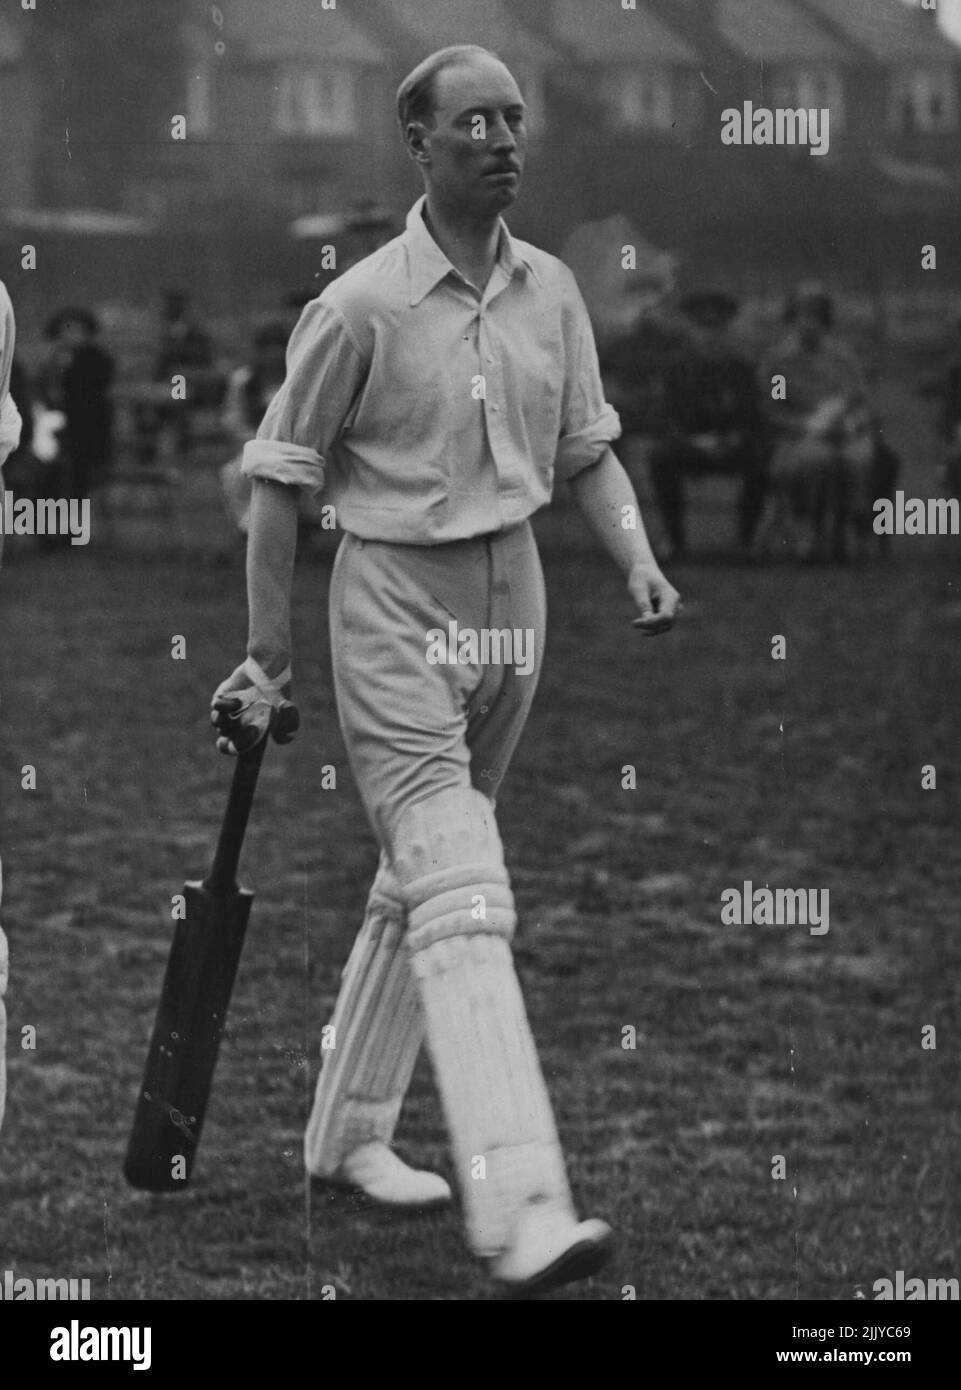 The new Duke of Buccleuch, who inherited the title on his father's death recently, snapped going out to bat at a recent county game. He is the Brother-in-law of the Duke of Gloucester. December 02, 1935. Stock Photo